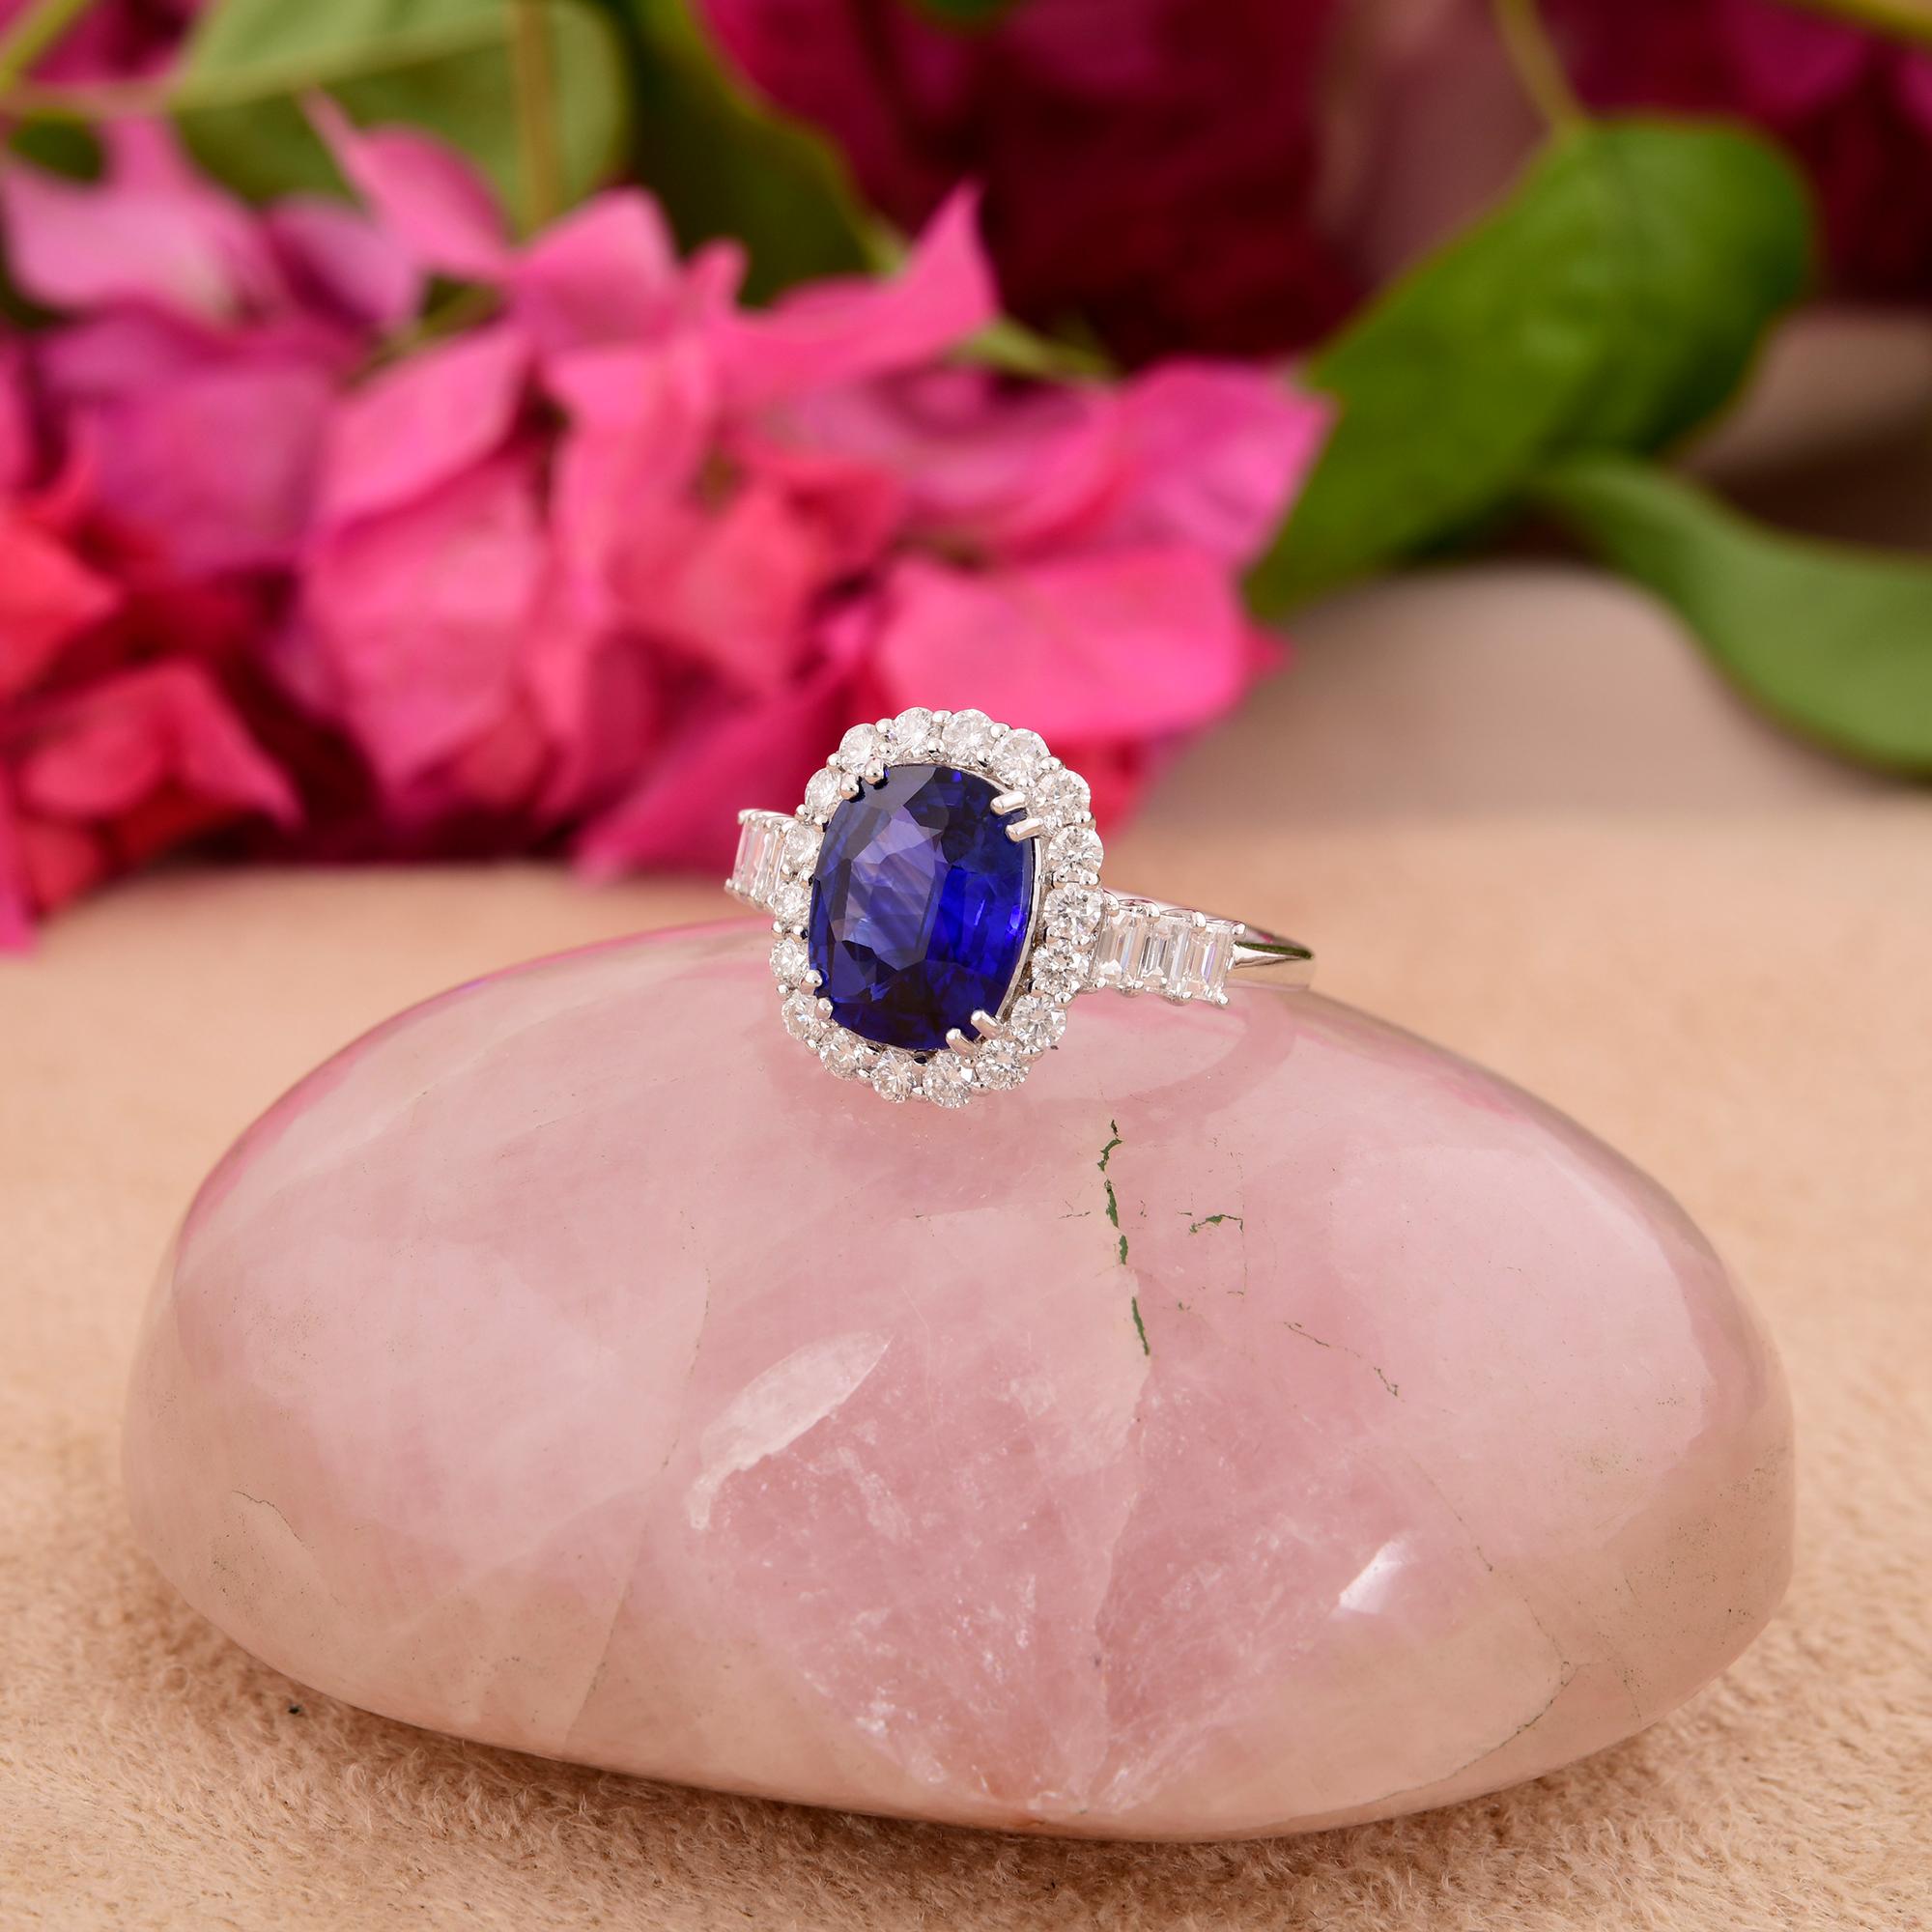 At the center of the ring glistens a mesmerizing Blue Sapphire gemstone, renowned for its deep, captivating hue and unparalleled brilliance. The sapphire's rich color exudes a sense of regal allure and sophistication, making it the perfect